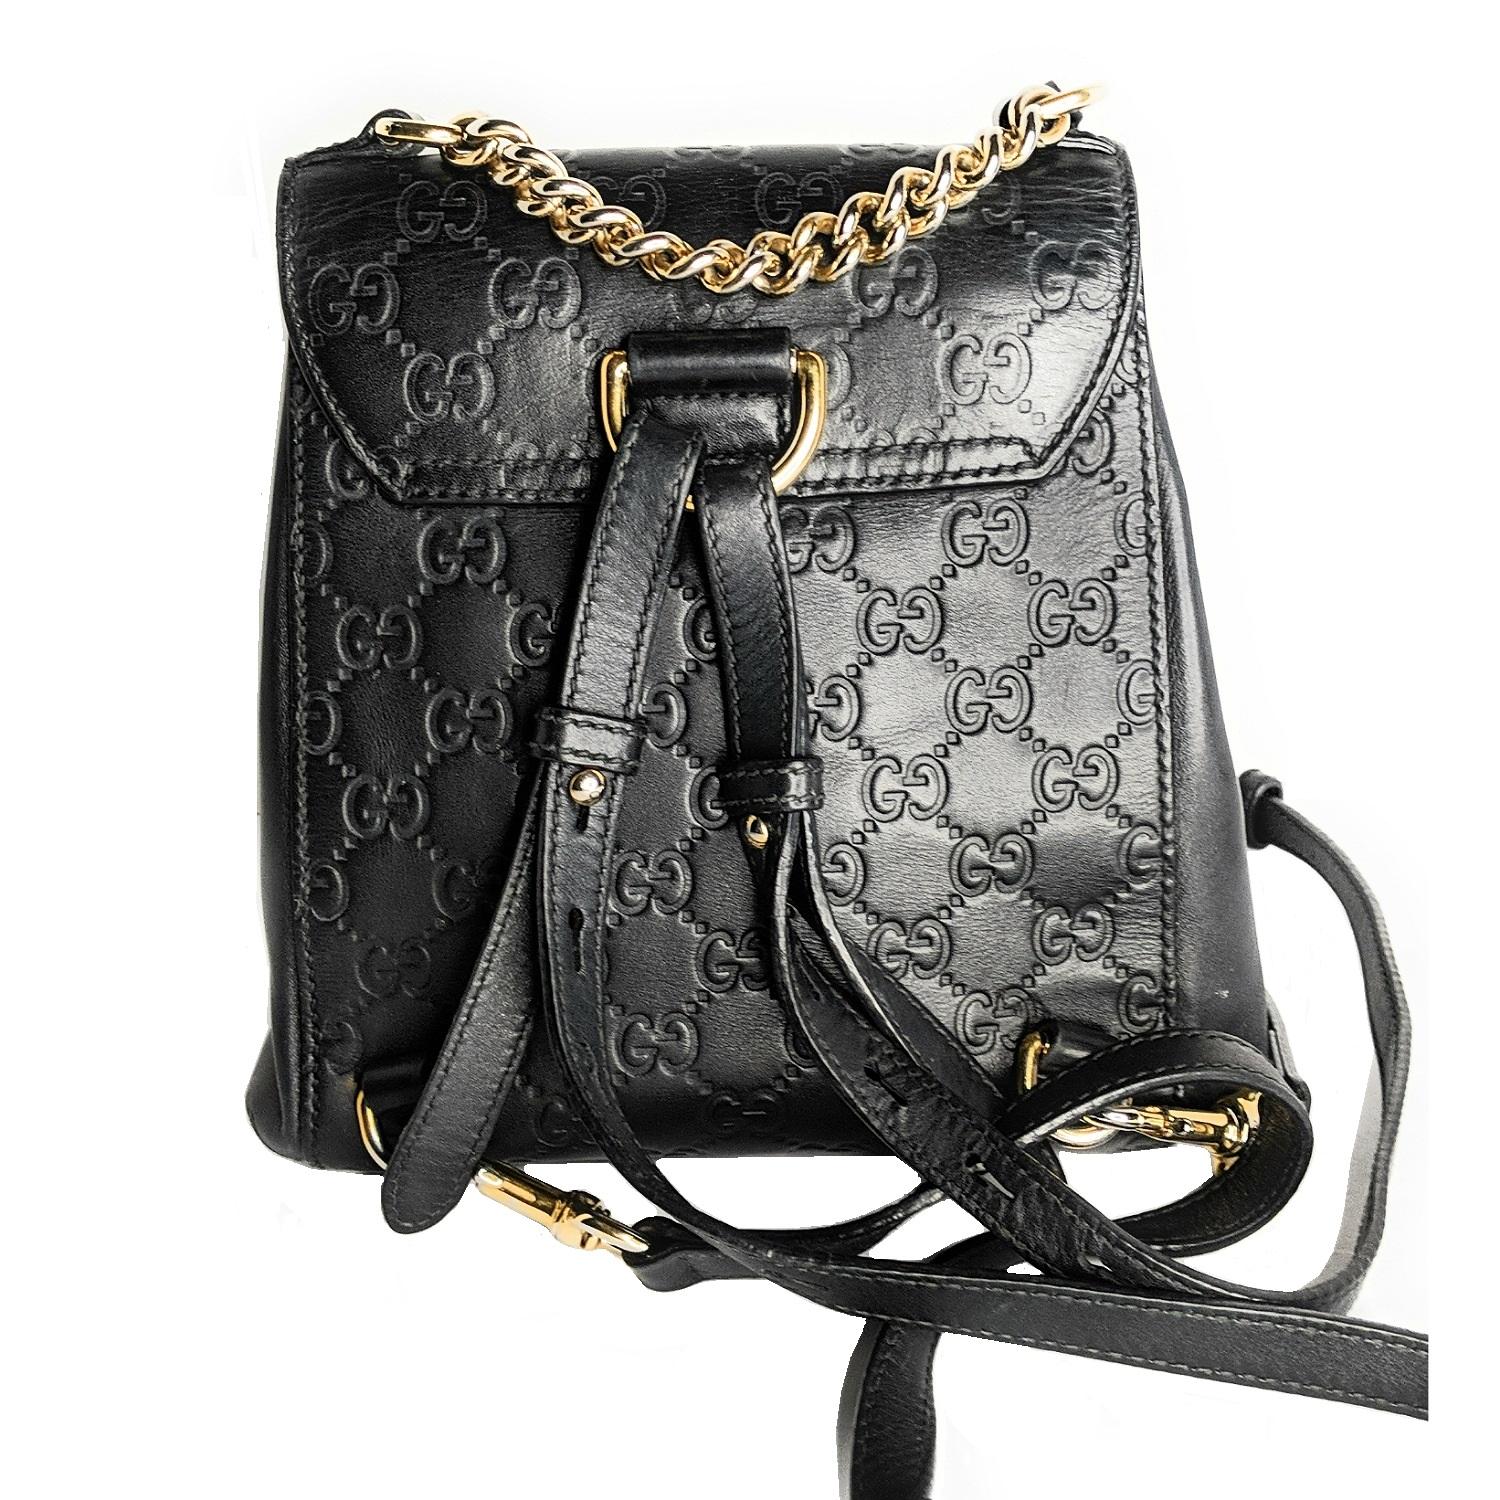 Black Signature Gucci Padlock Backpack with gold-tone hardware, single chain-link top handle, dual shoulder straps, peach suede interior, dual slip pockets at interior wall, and S-lock closure at front flap. Includes key and clochette. Retail price